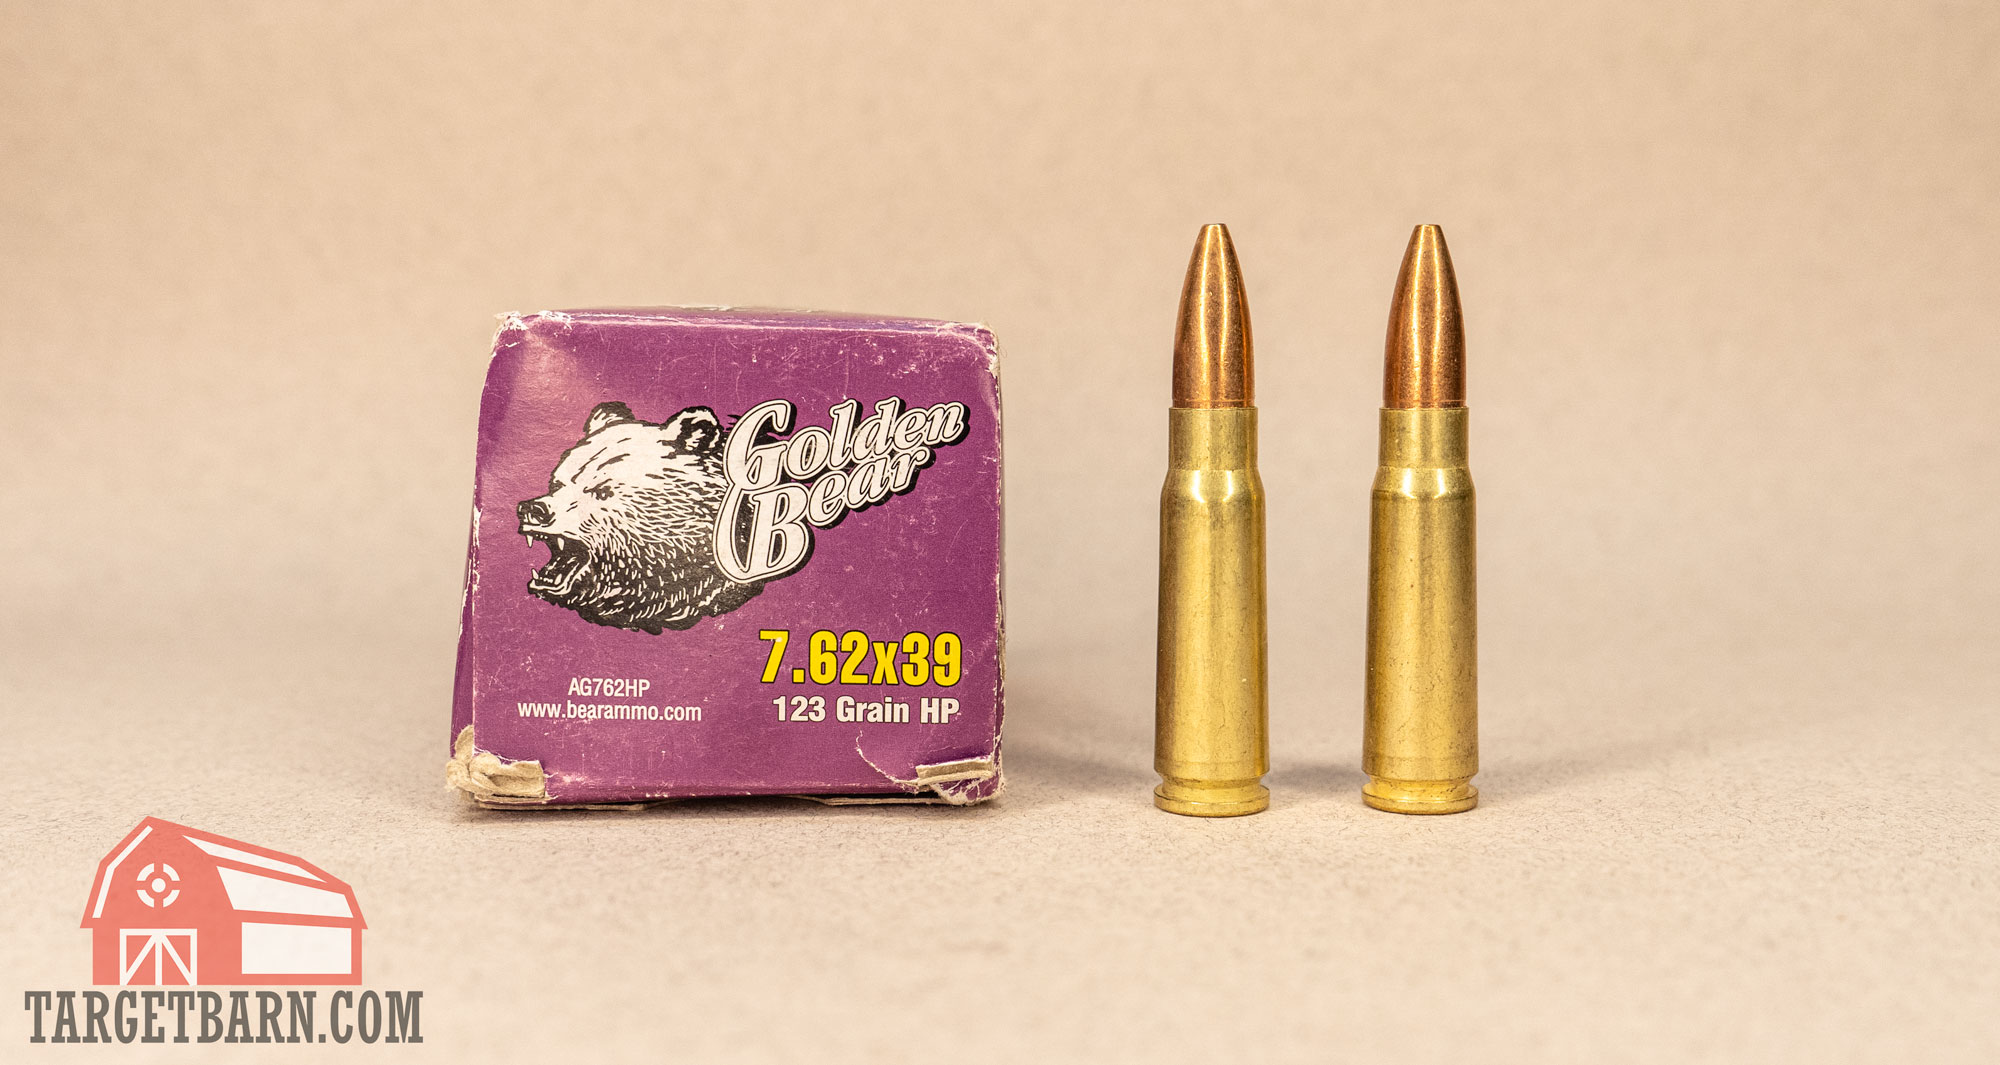 a box of golden bear 7.62x39mm with two rounds